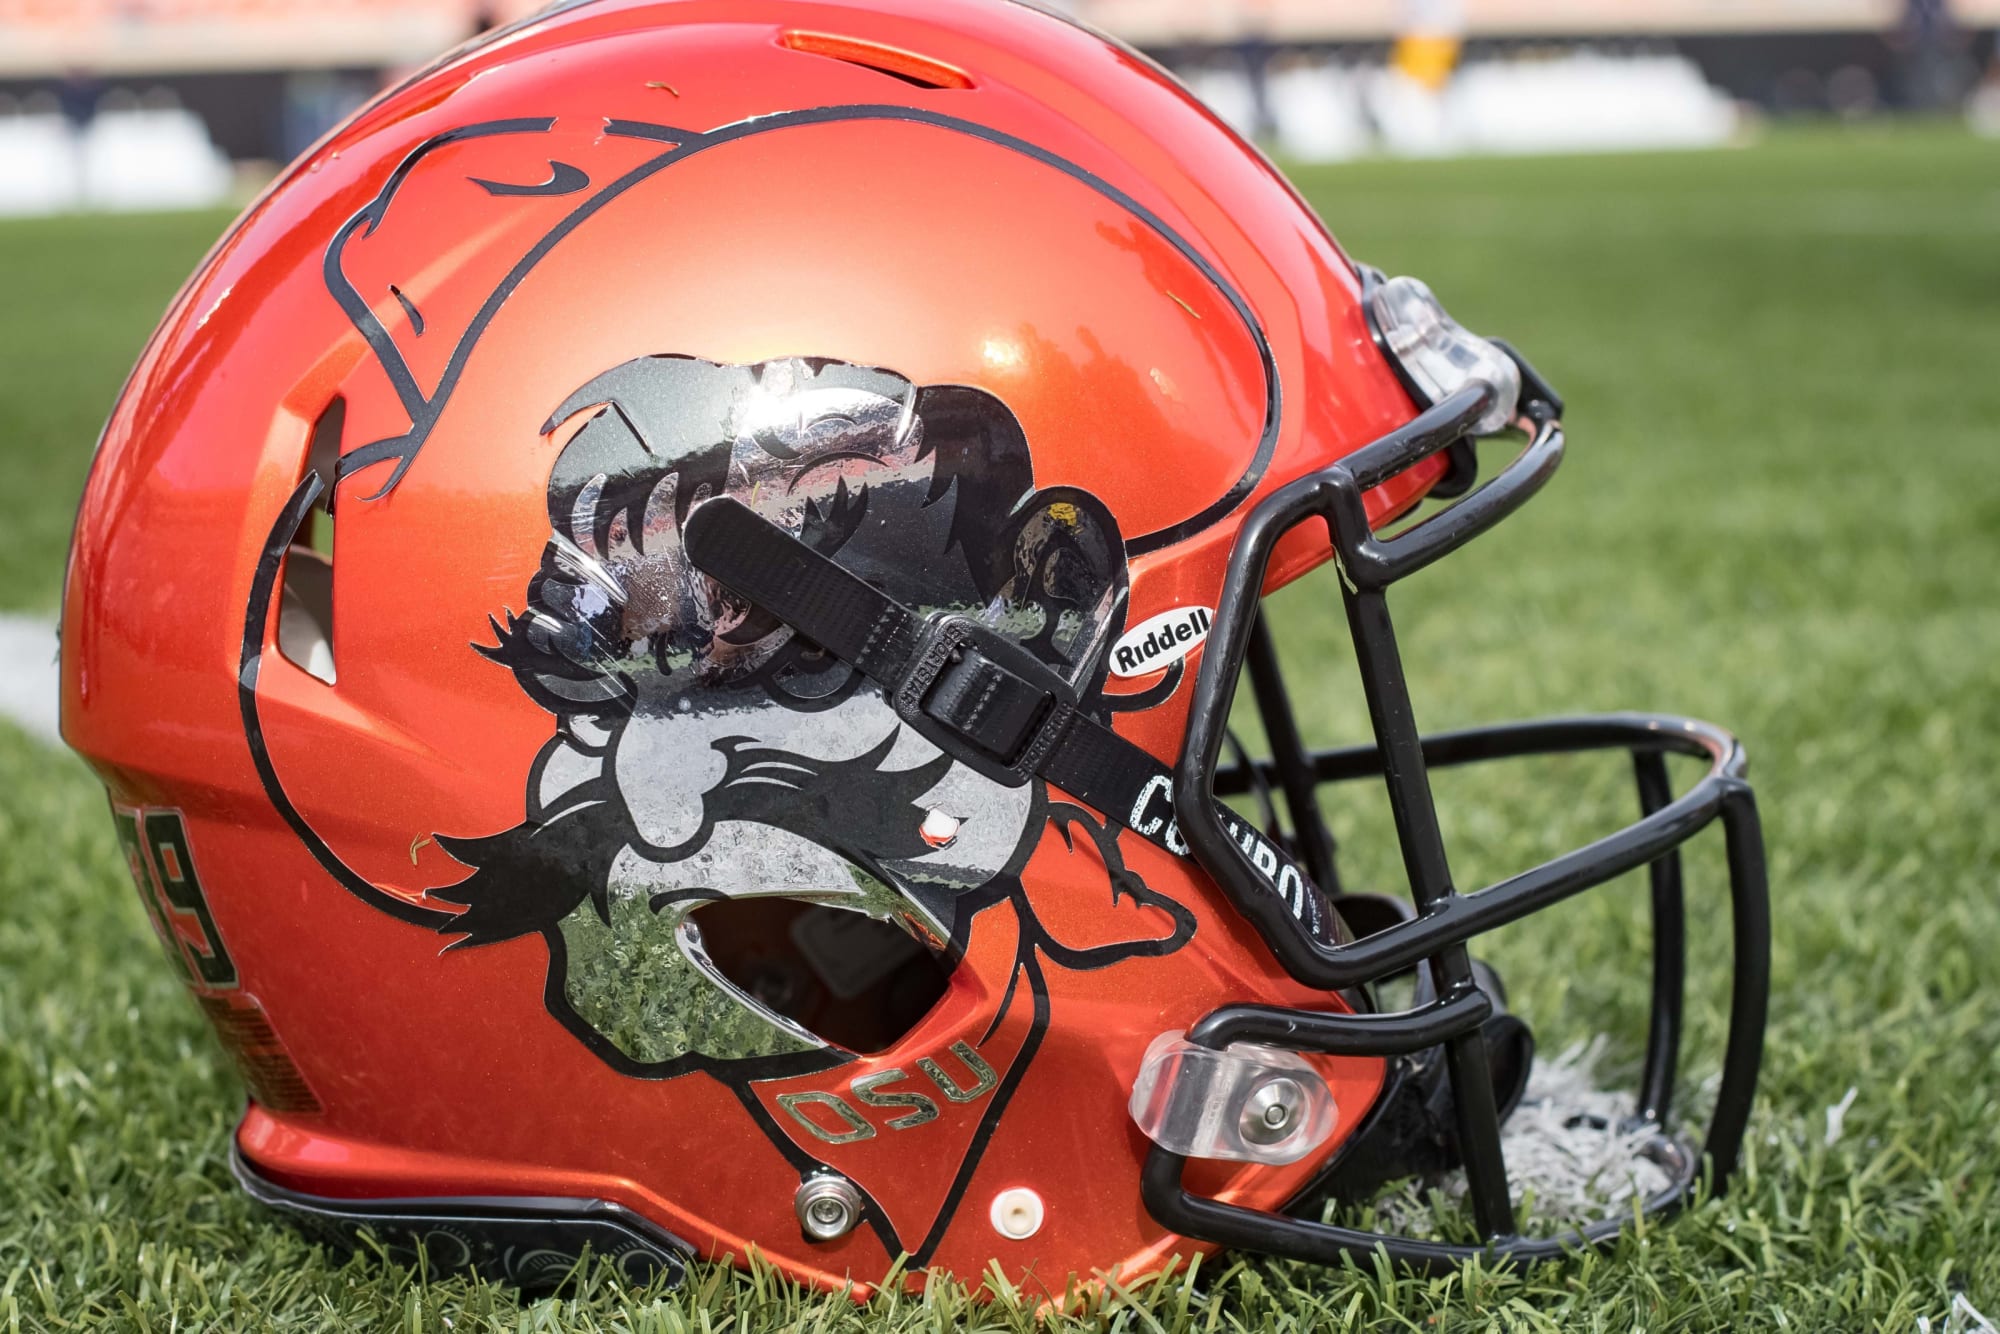 Big 12 Football: The best and worst helmets in the conference